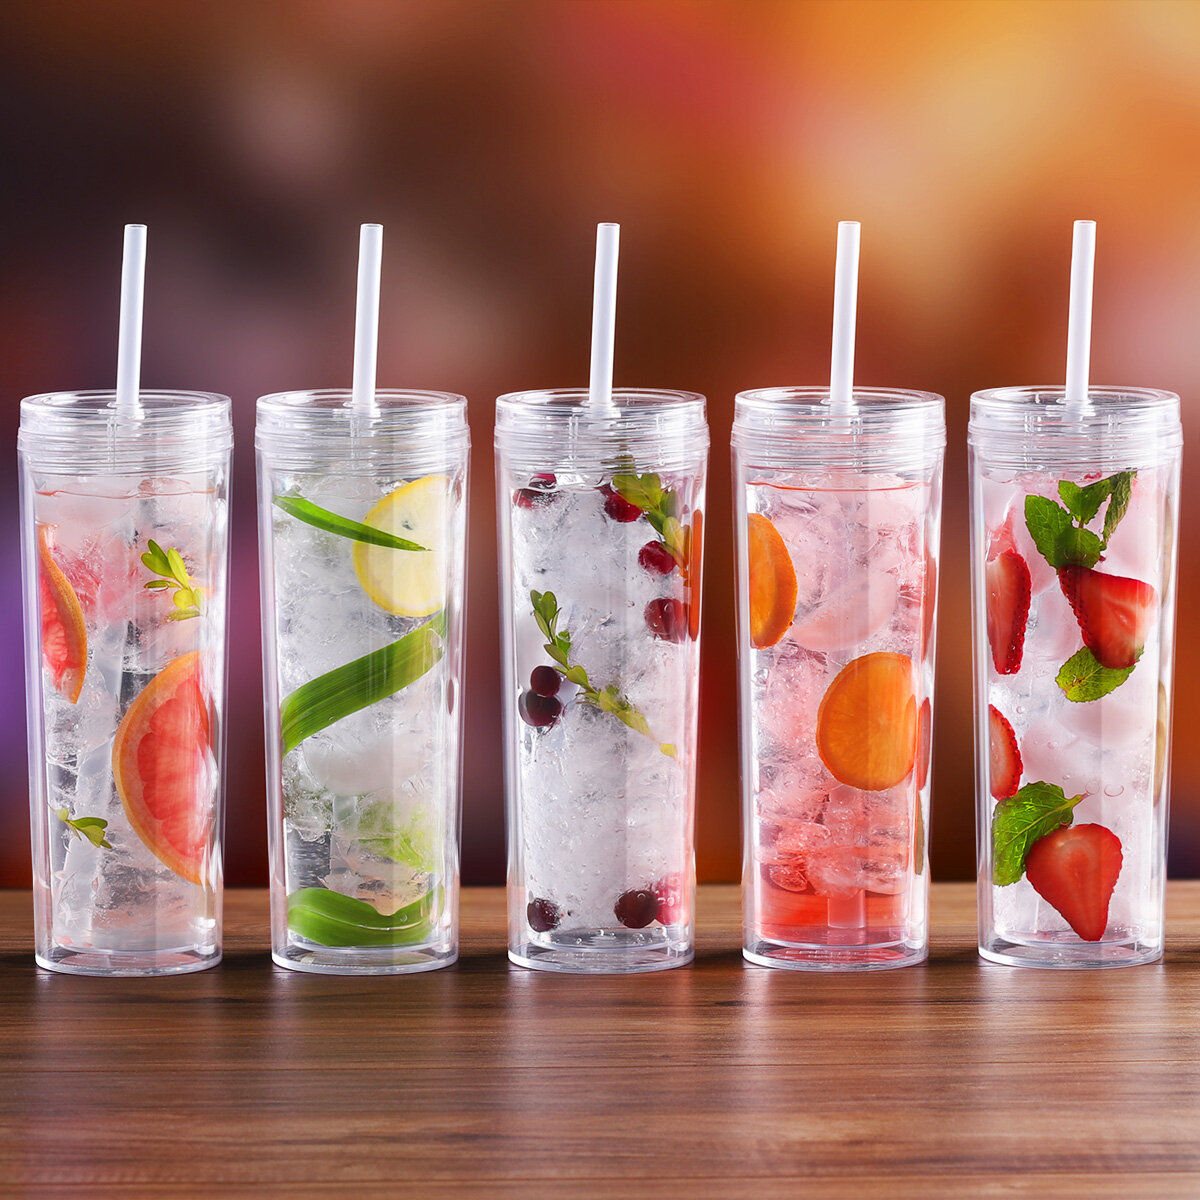 Cupture 12 Insulated Double Wall Tumbler Cup with Lid,  Reusable Straw & Hello Name Tags, Colors may vary: Tumblers & Water Glasses